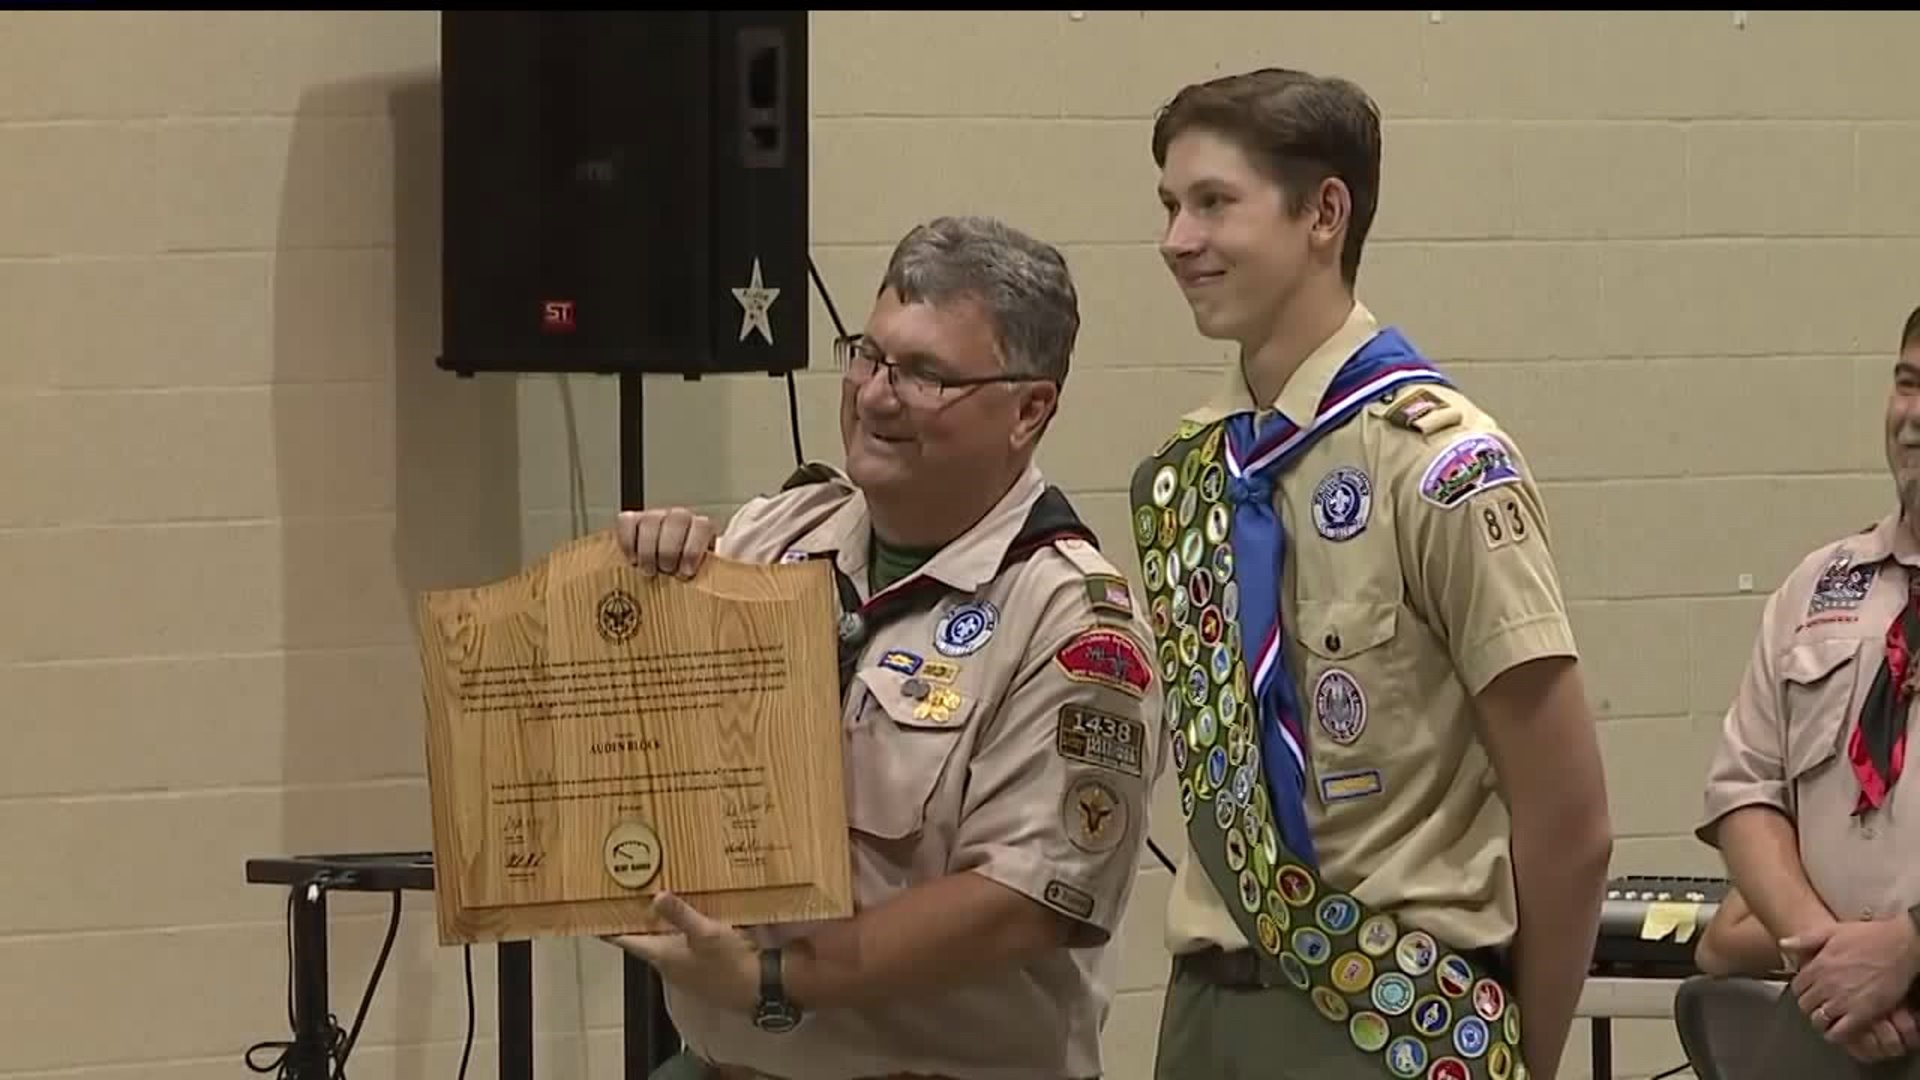 Eagle Scout earns all 137 merit badges